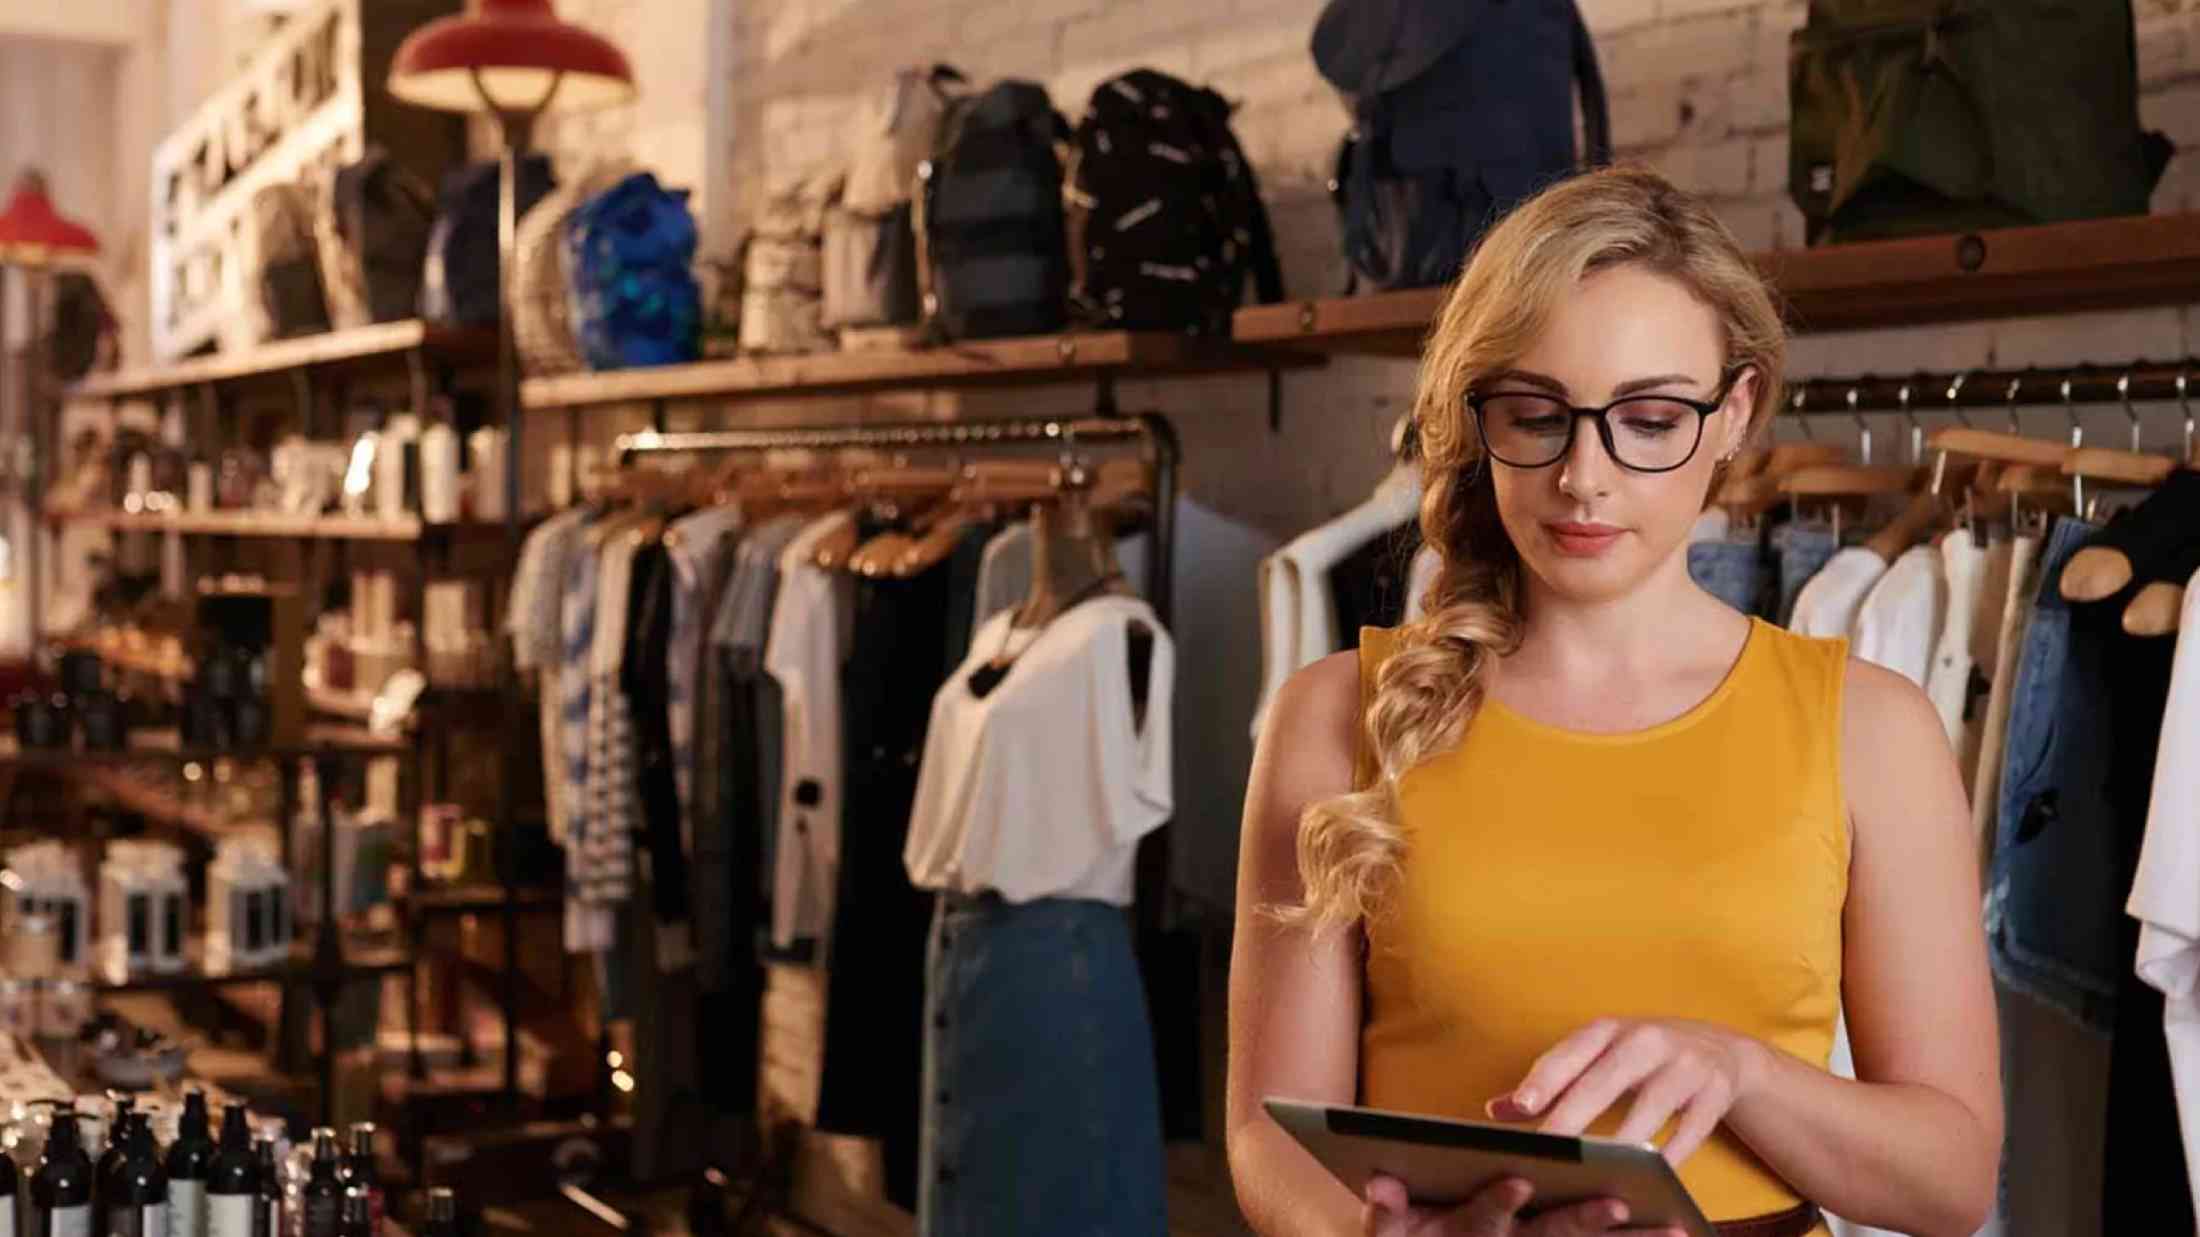 Woman wearing mustard coloured sleeveless top using an iPad while stood in her clothes shop